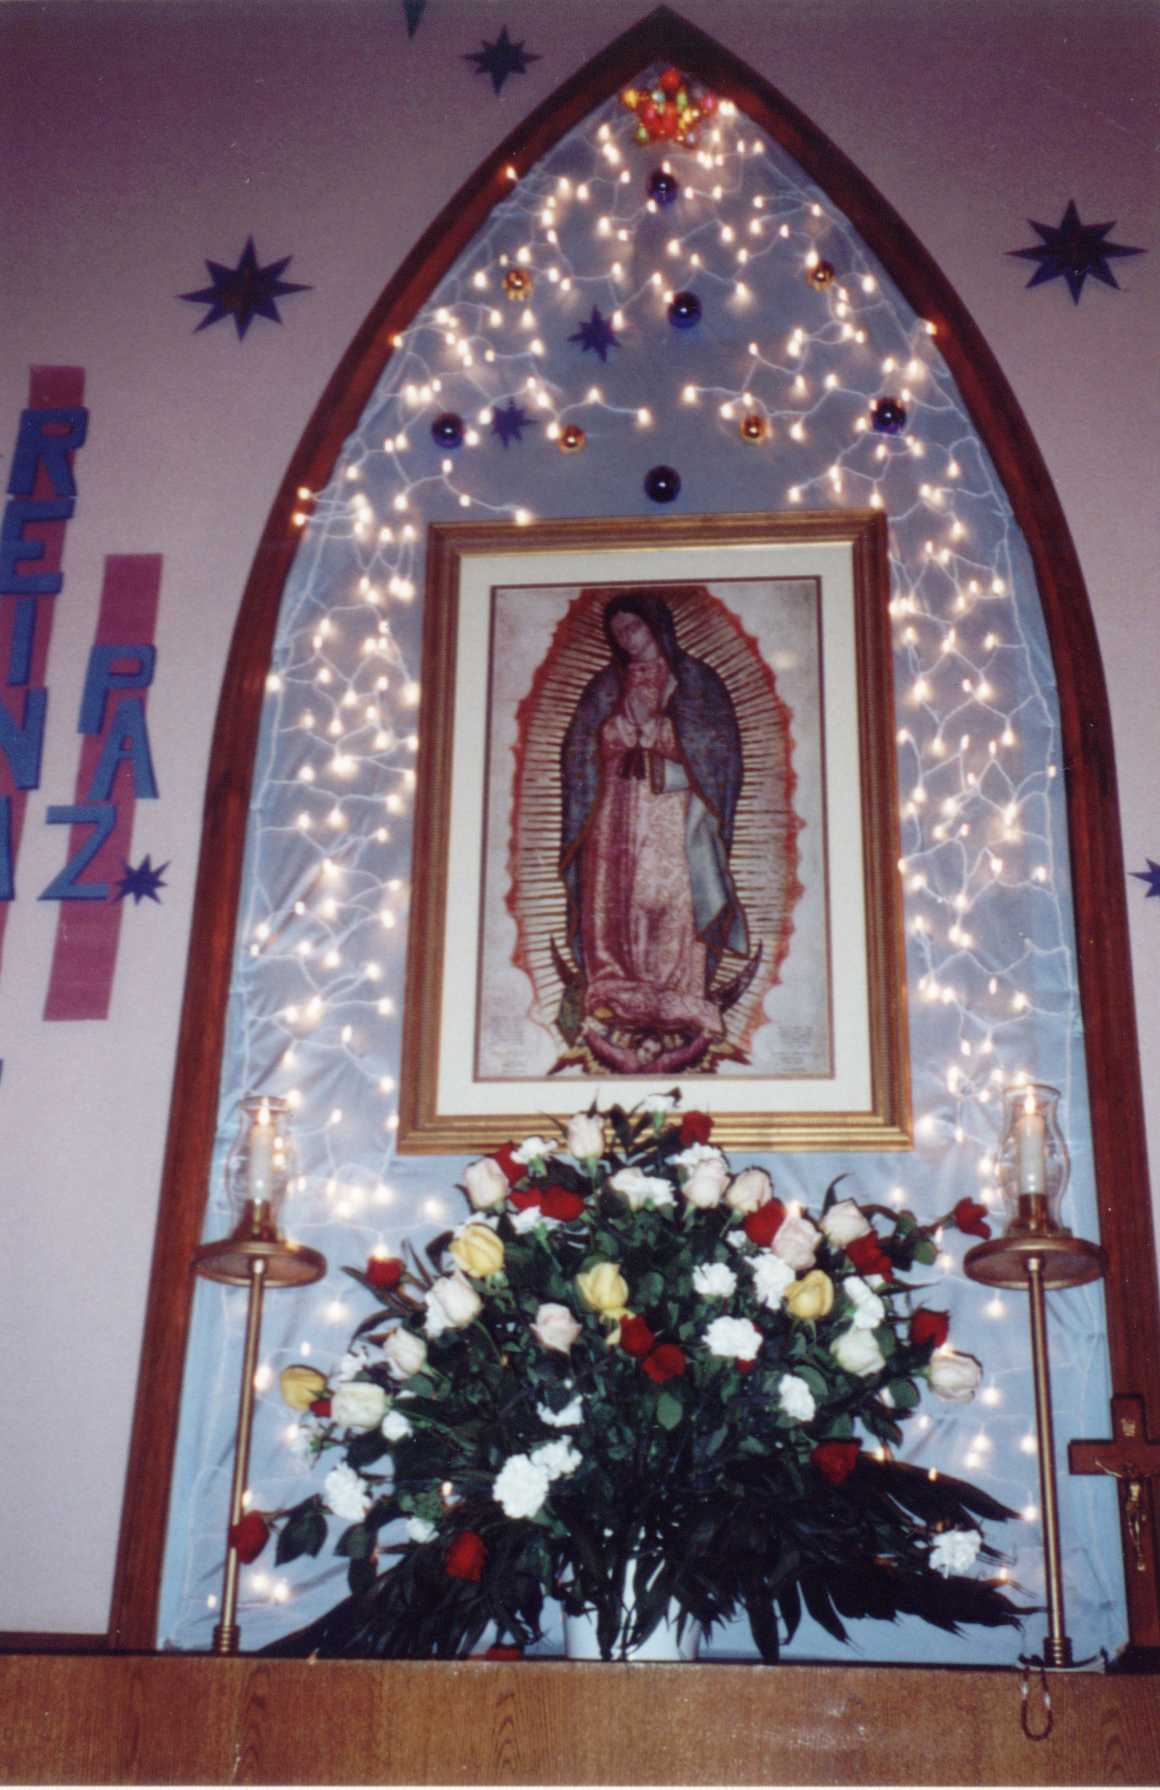 Our Lady of Guadalupe Altar in St. Edwards Church